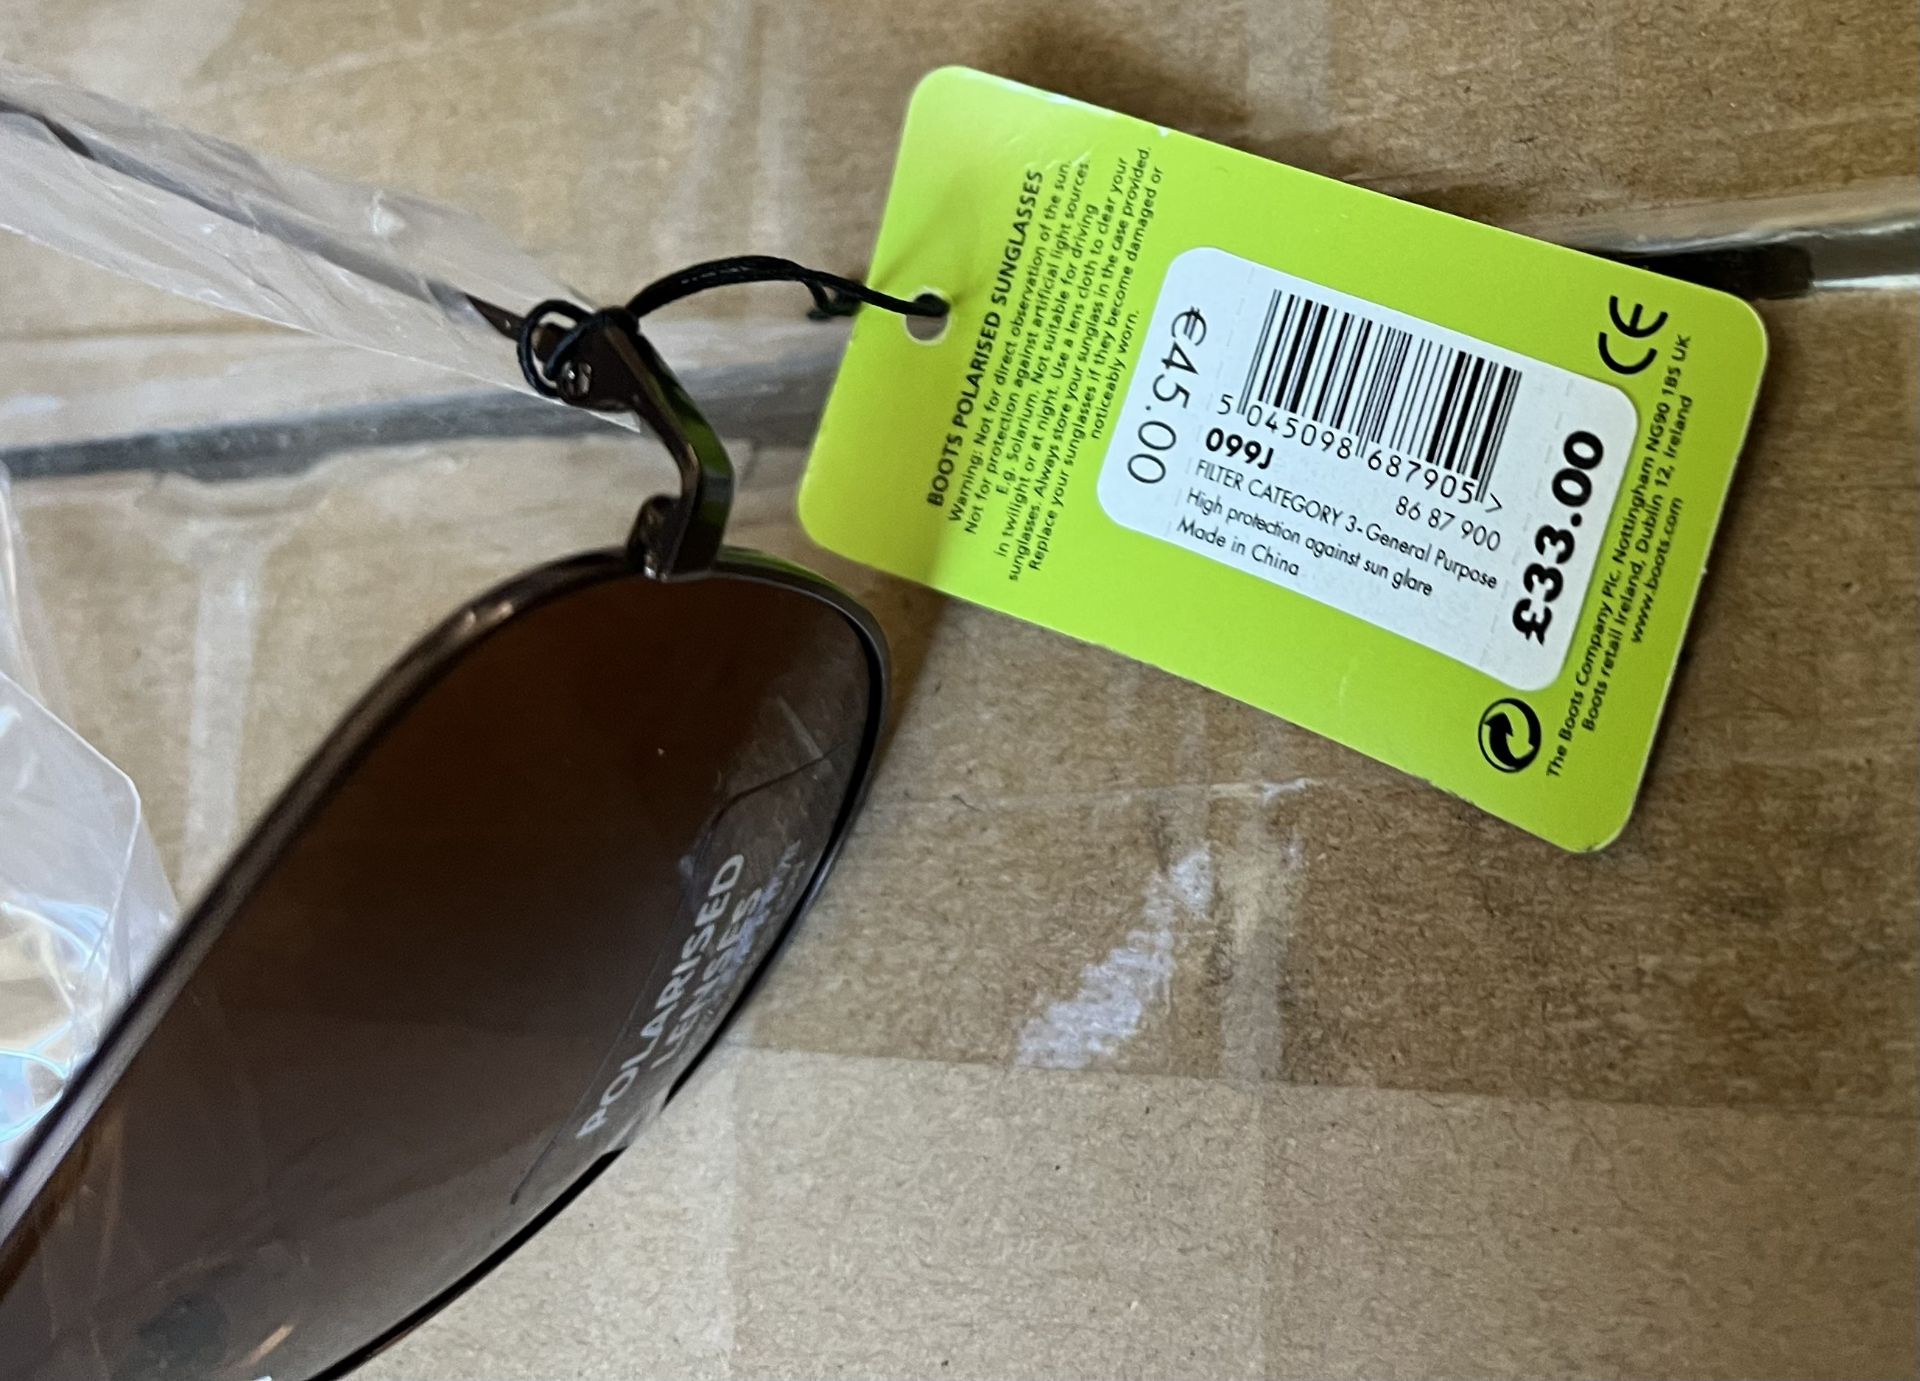 40 x Boots Polarised Lens Pilot Style Sunglasses 100% UVA - (NEW) - BOOTS RRP Â£1,320 ! - Image 7 of 7